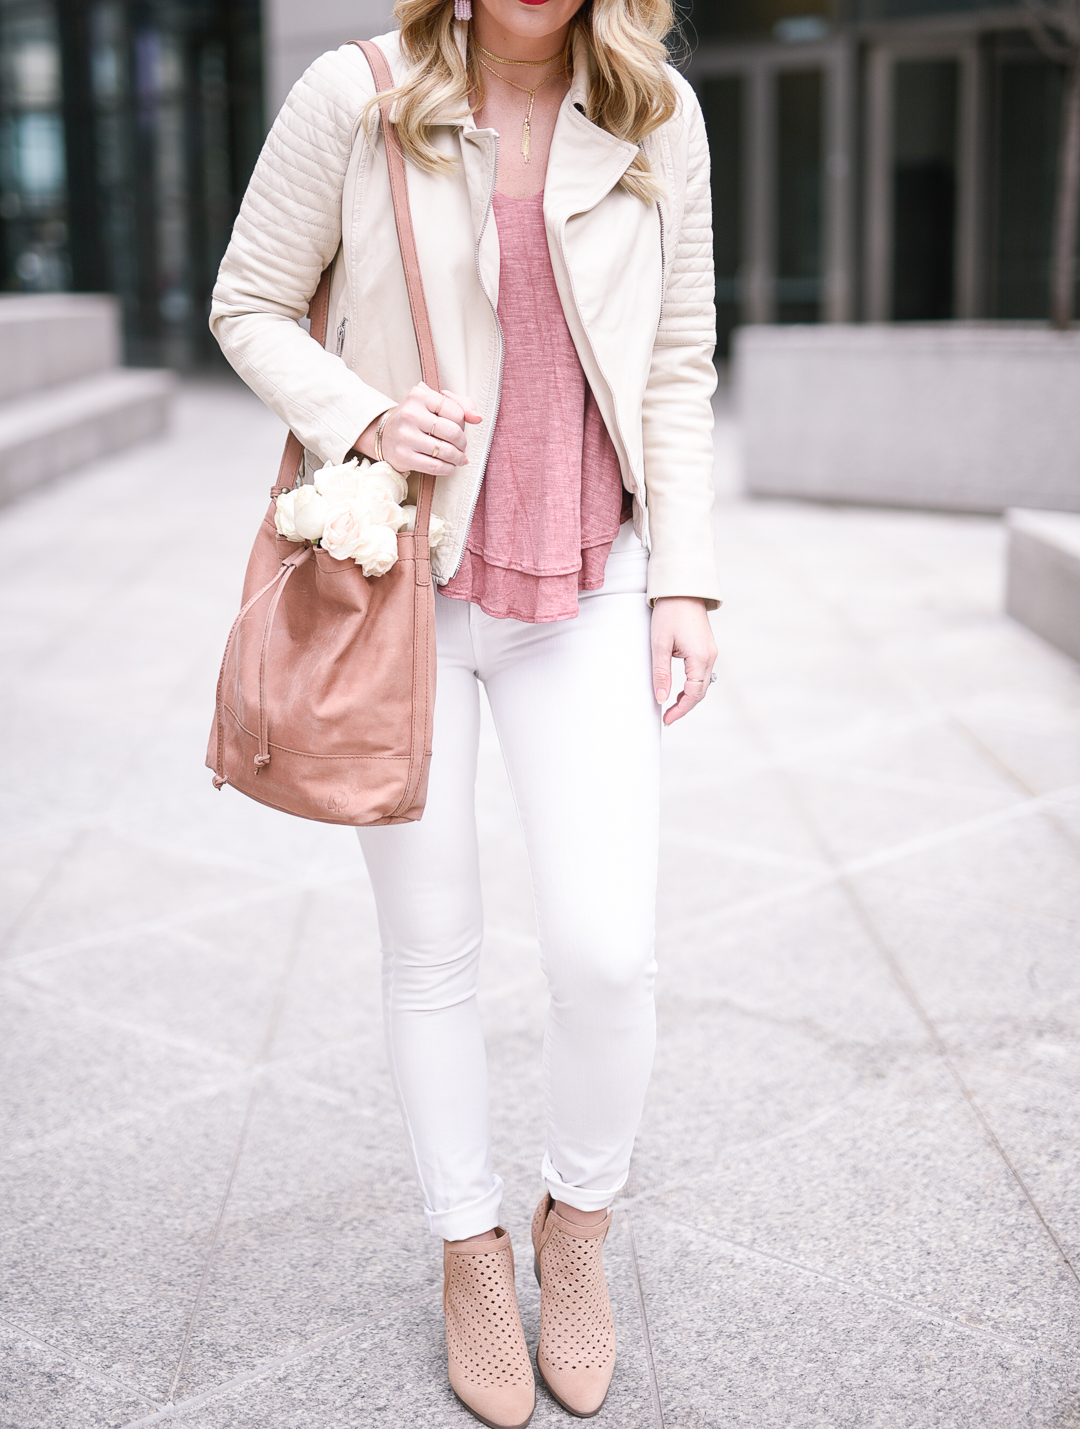 Neutral spring outfit with blush and ivory accents. 